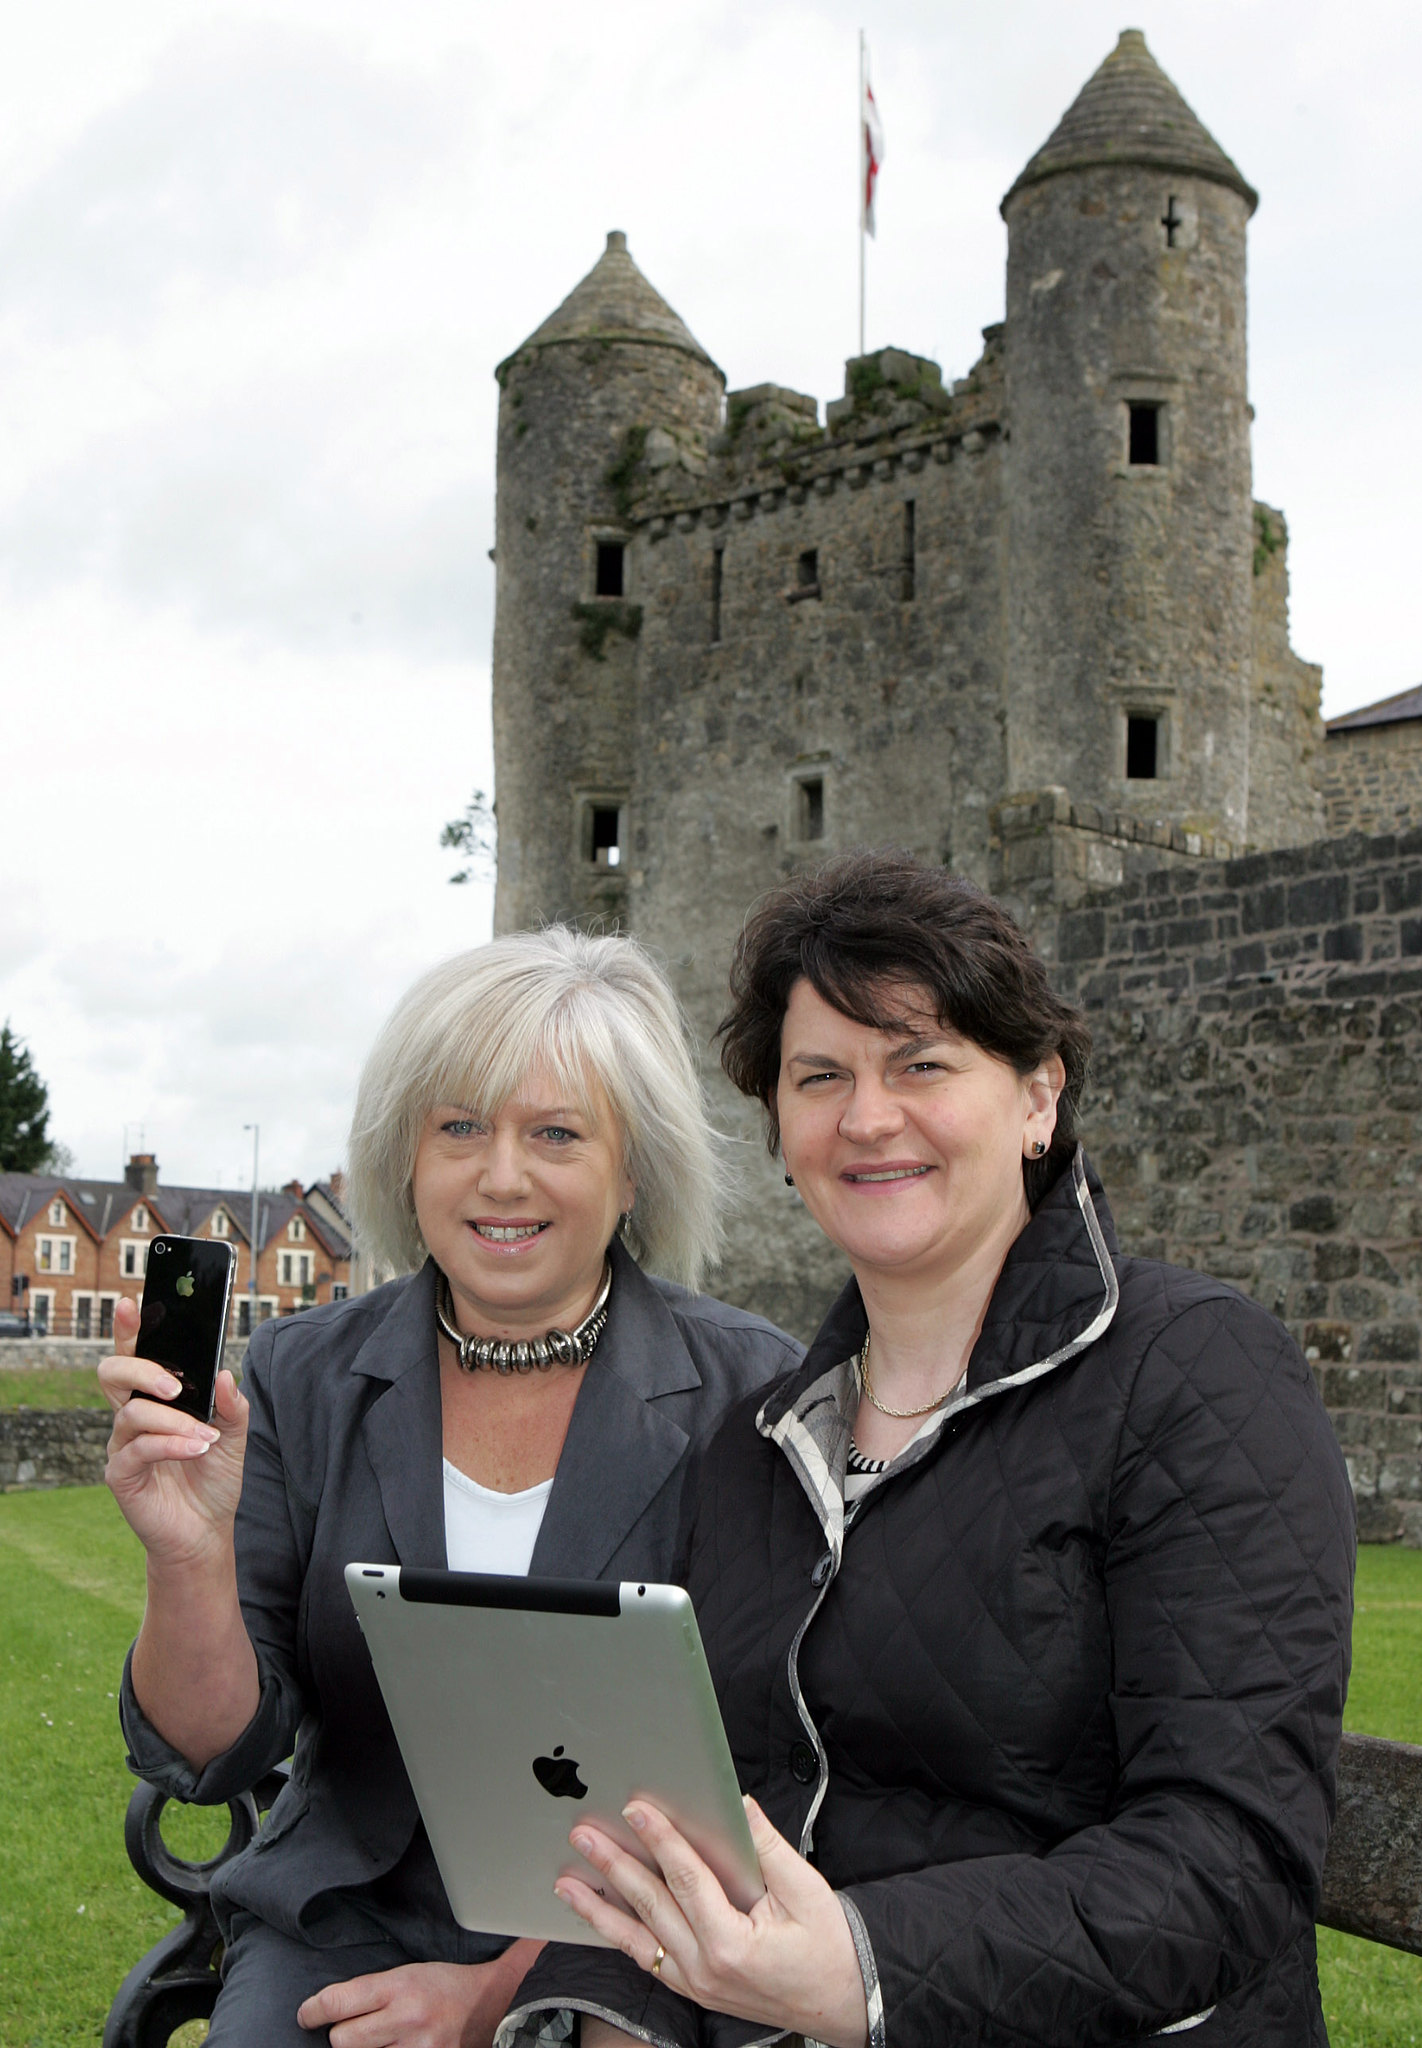 Two women sitting in front of an old castle. One holds an iPhone, the other an iPad.